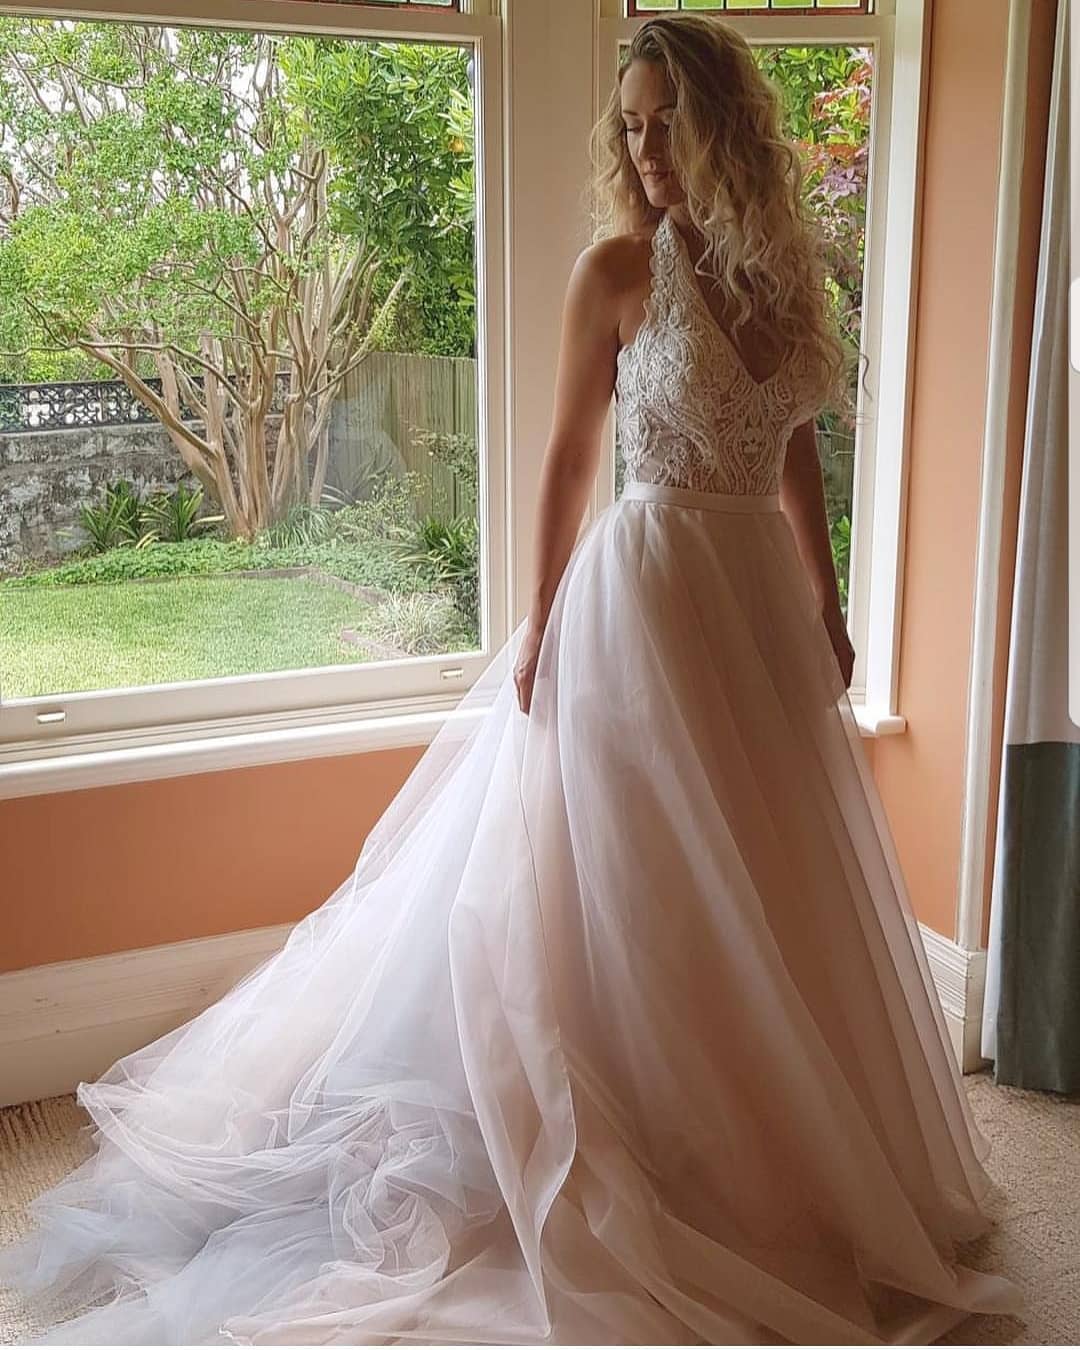 Gorgeous Pink Wedding Heavy Embroidered Gown